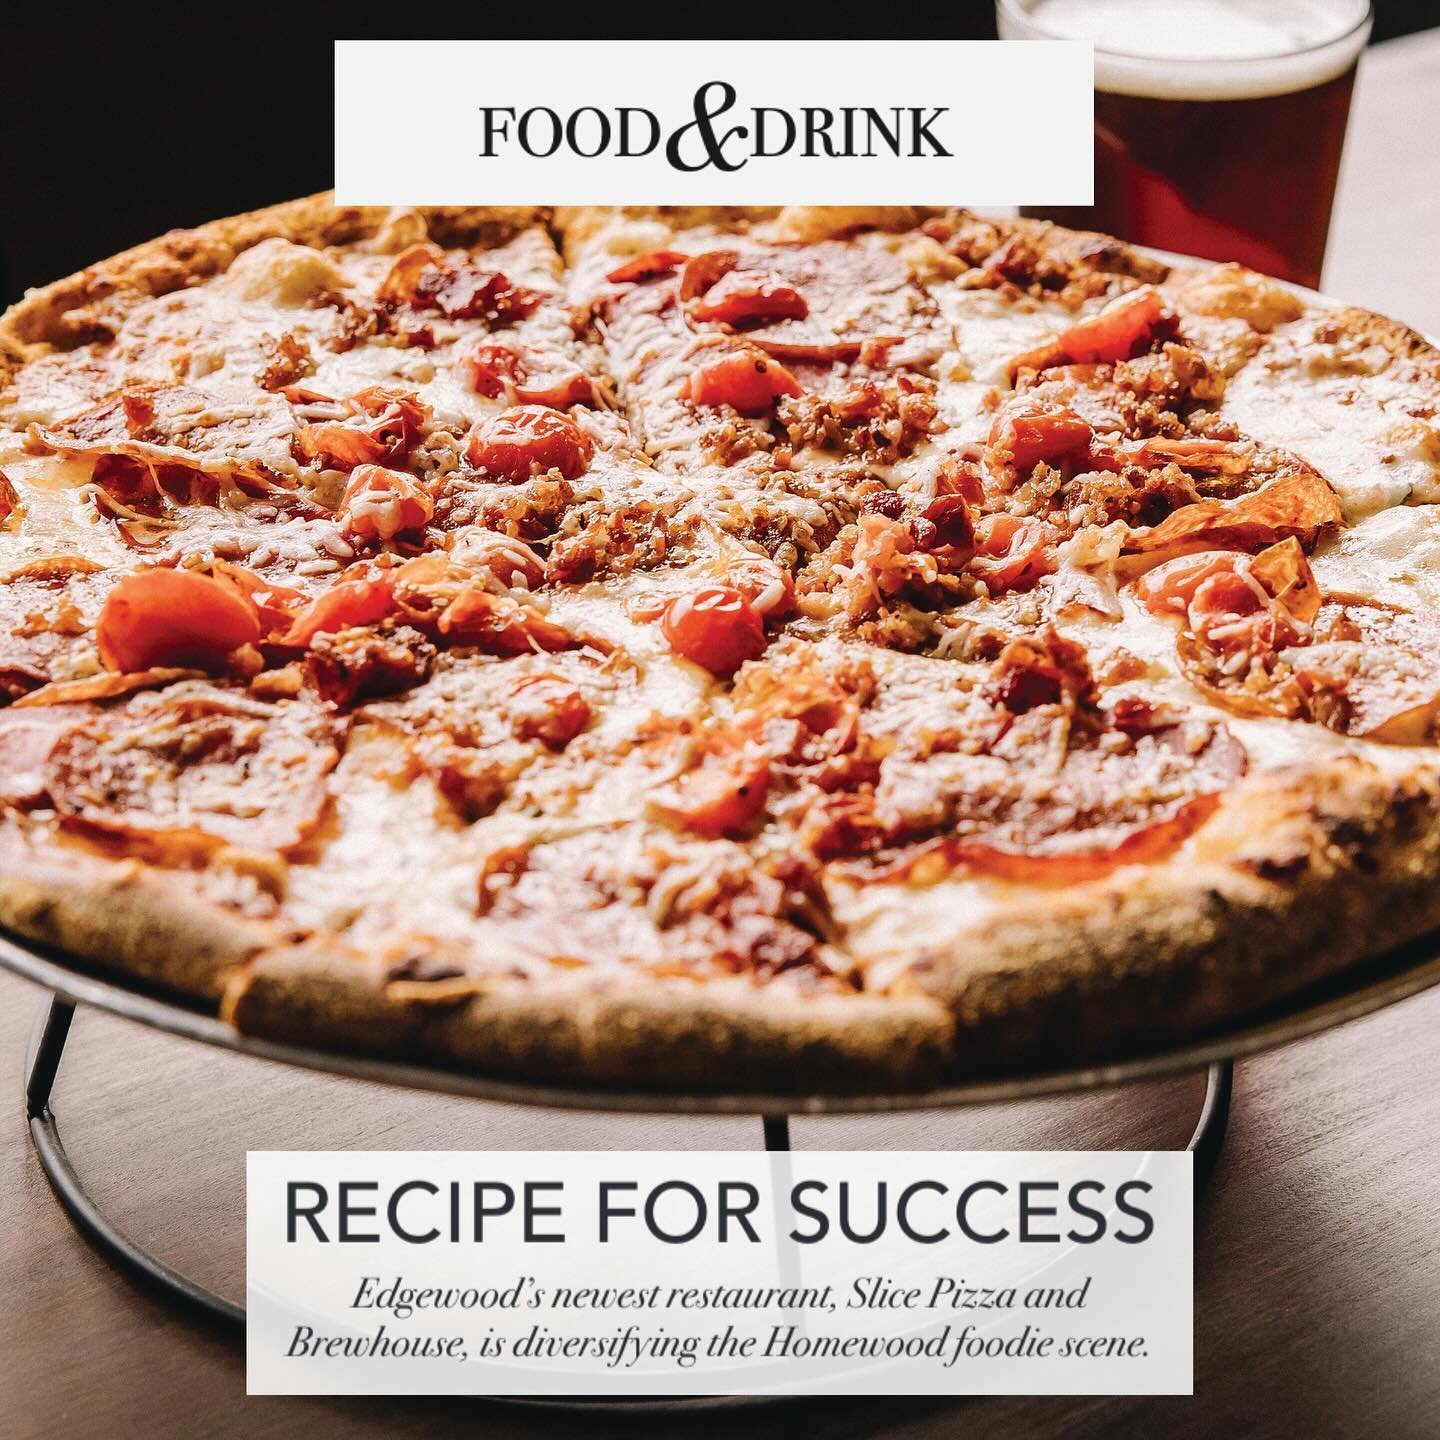 Recipe for Success! We&rsquo;re thrilled to share that our newest location, Slice Pizza &amp; Brew Homewood, has been featured in Homewood Life Magazine&rsquo;s Summer Issue, shining a spotlight on our journey from humble beginnings to where we proud